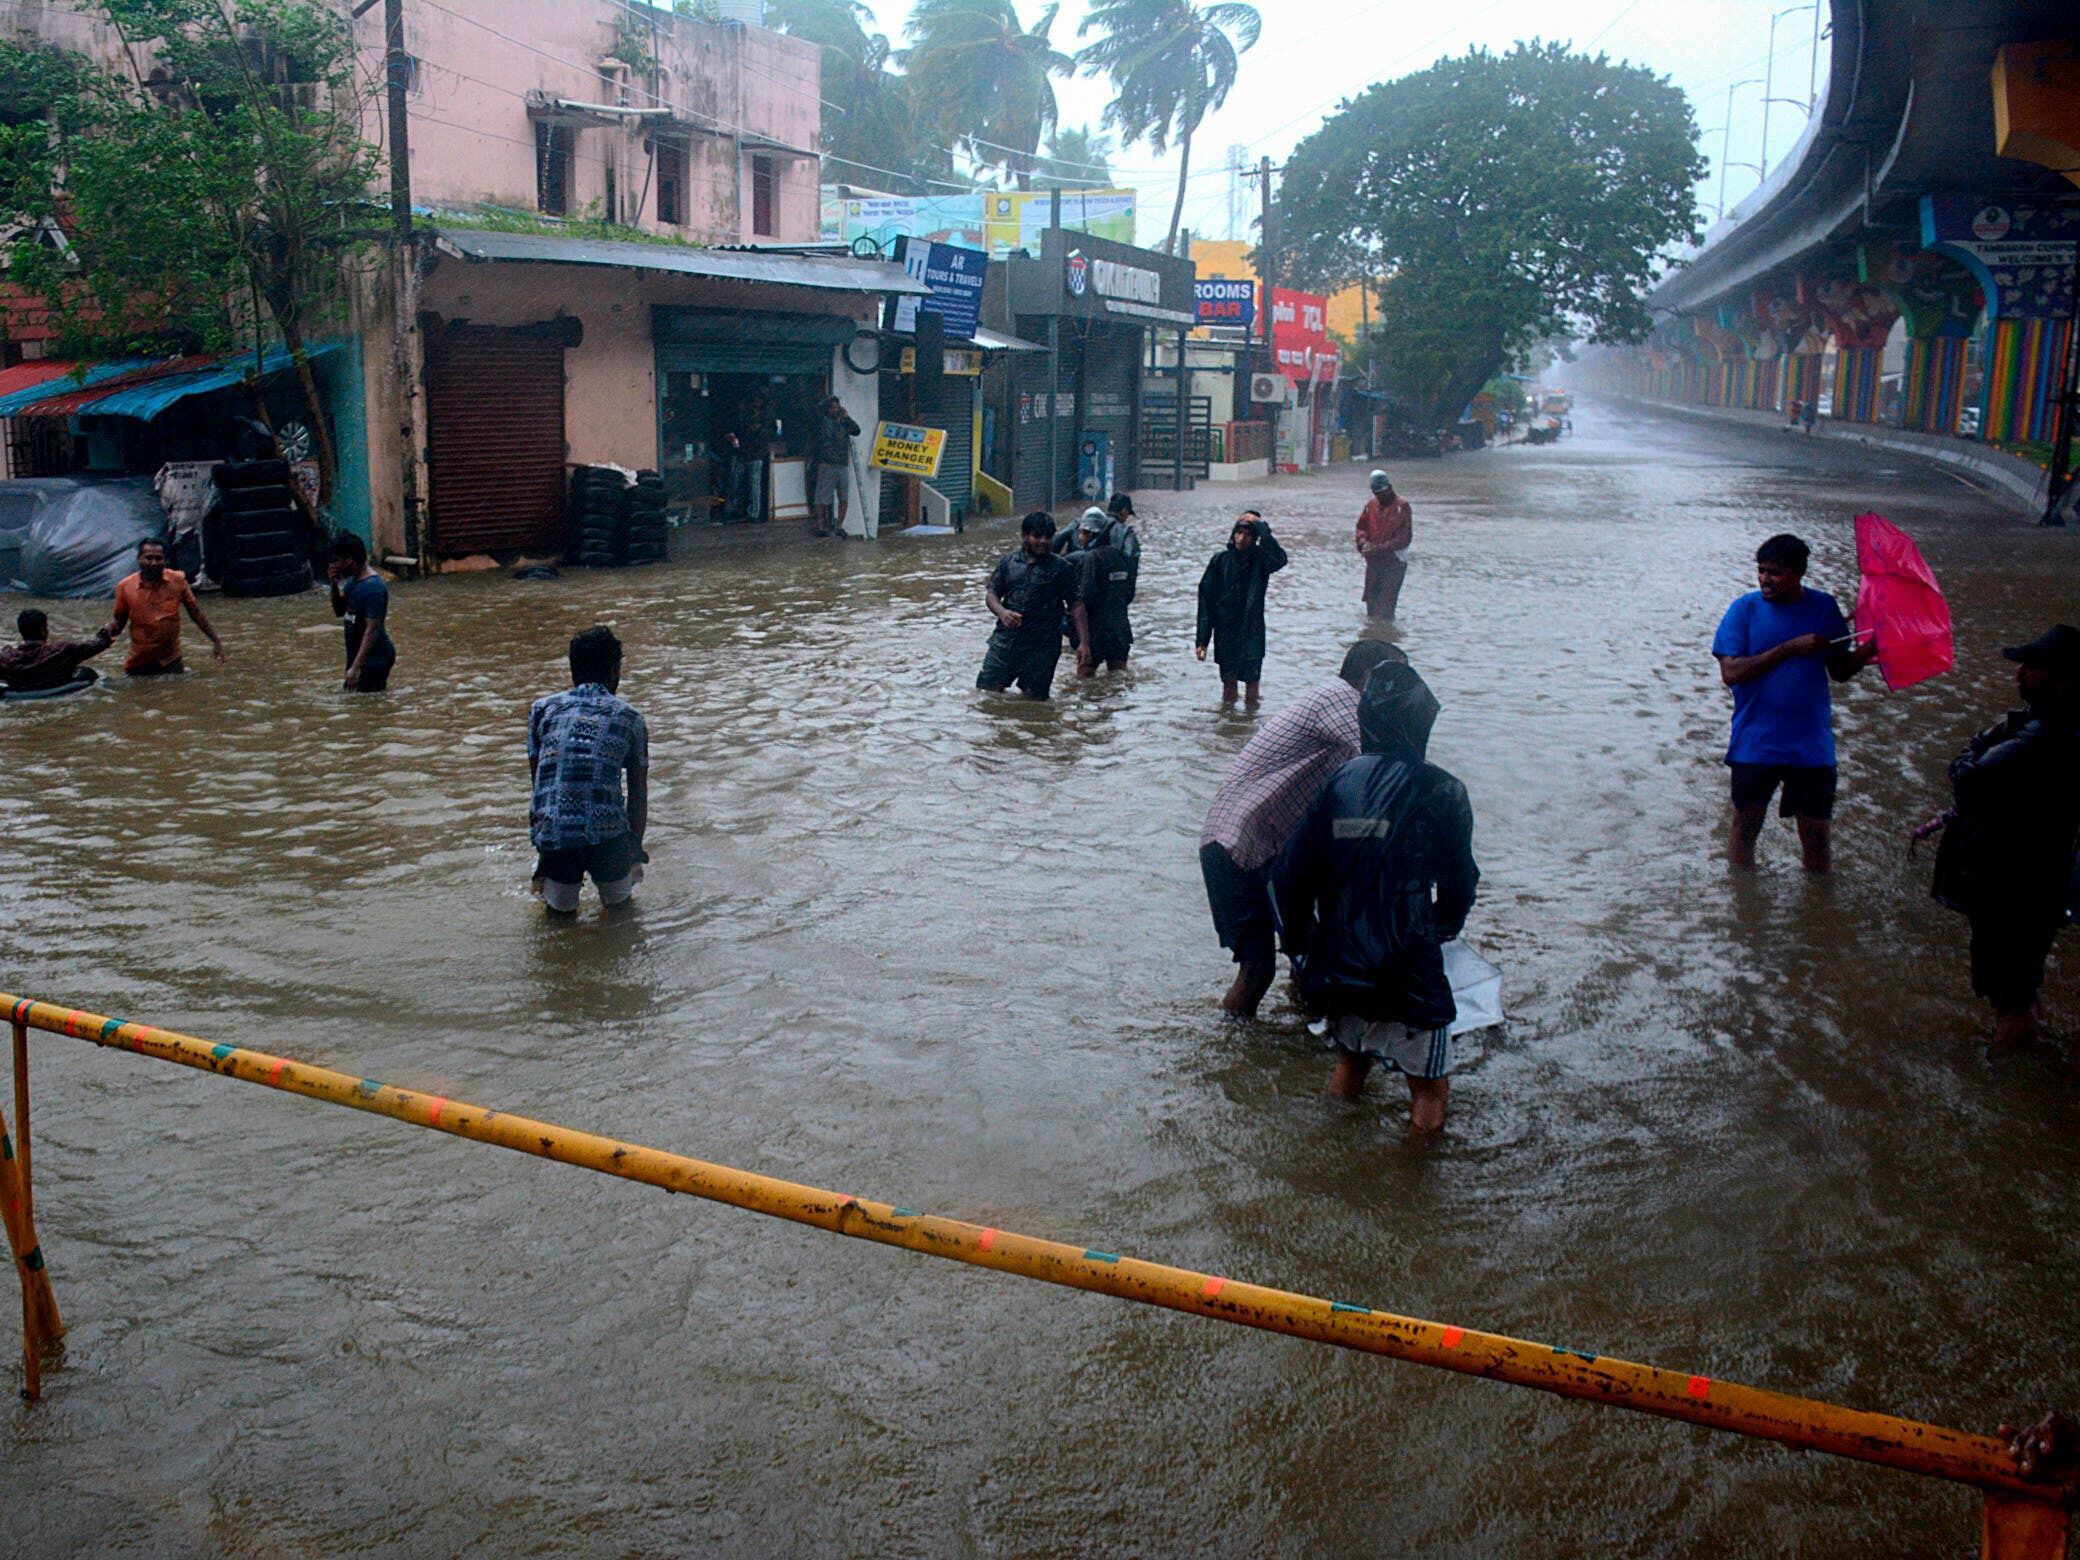 Heavy rains lash south and east India coasts as they brace for powerful storm